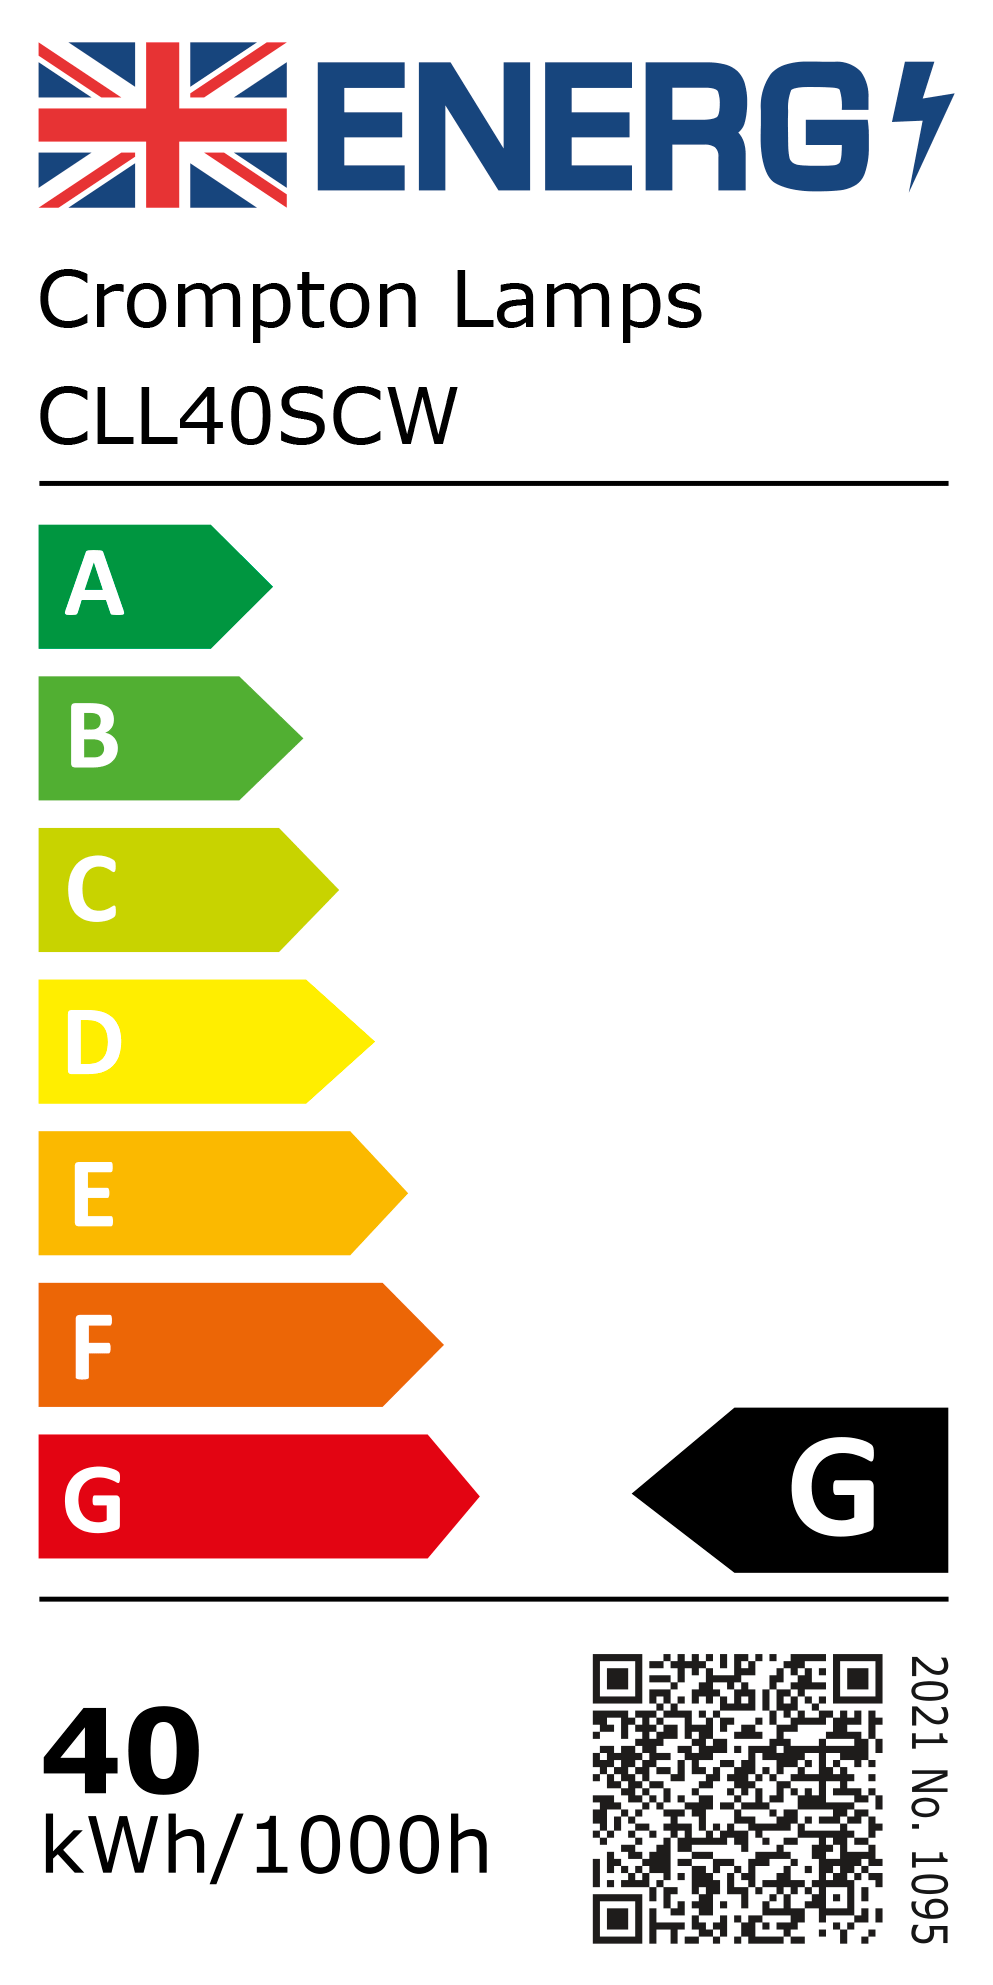 New 2021 Energy Rating Label: MPN CLL40SCW